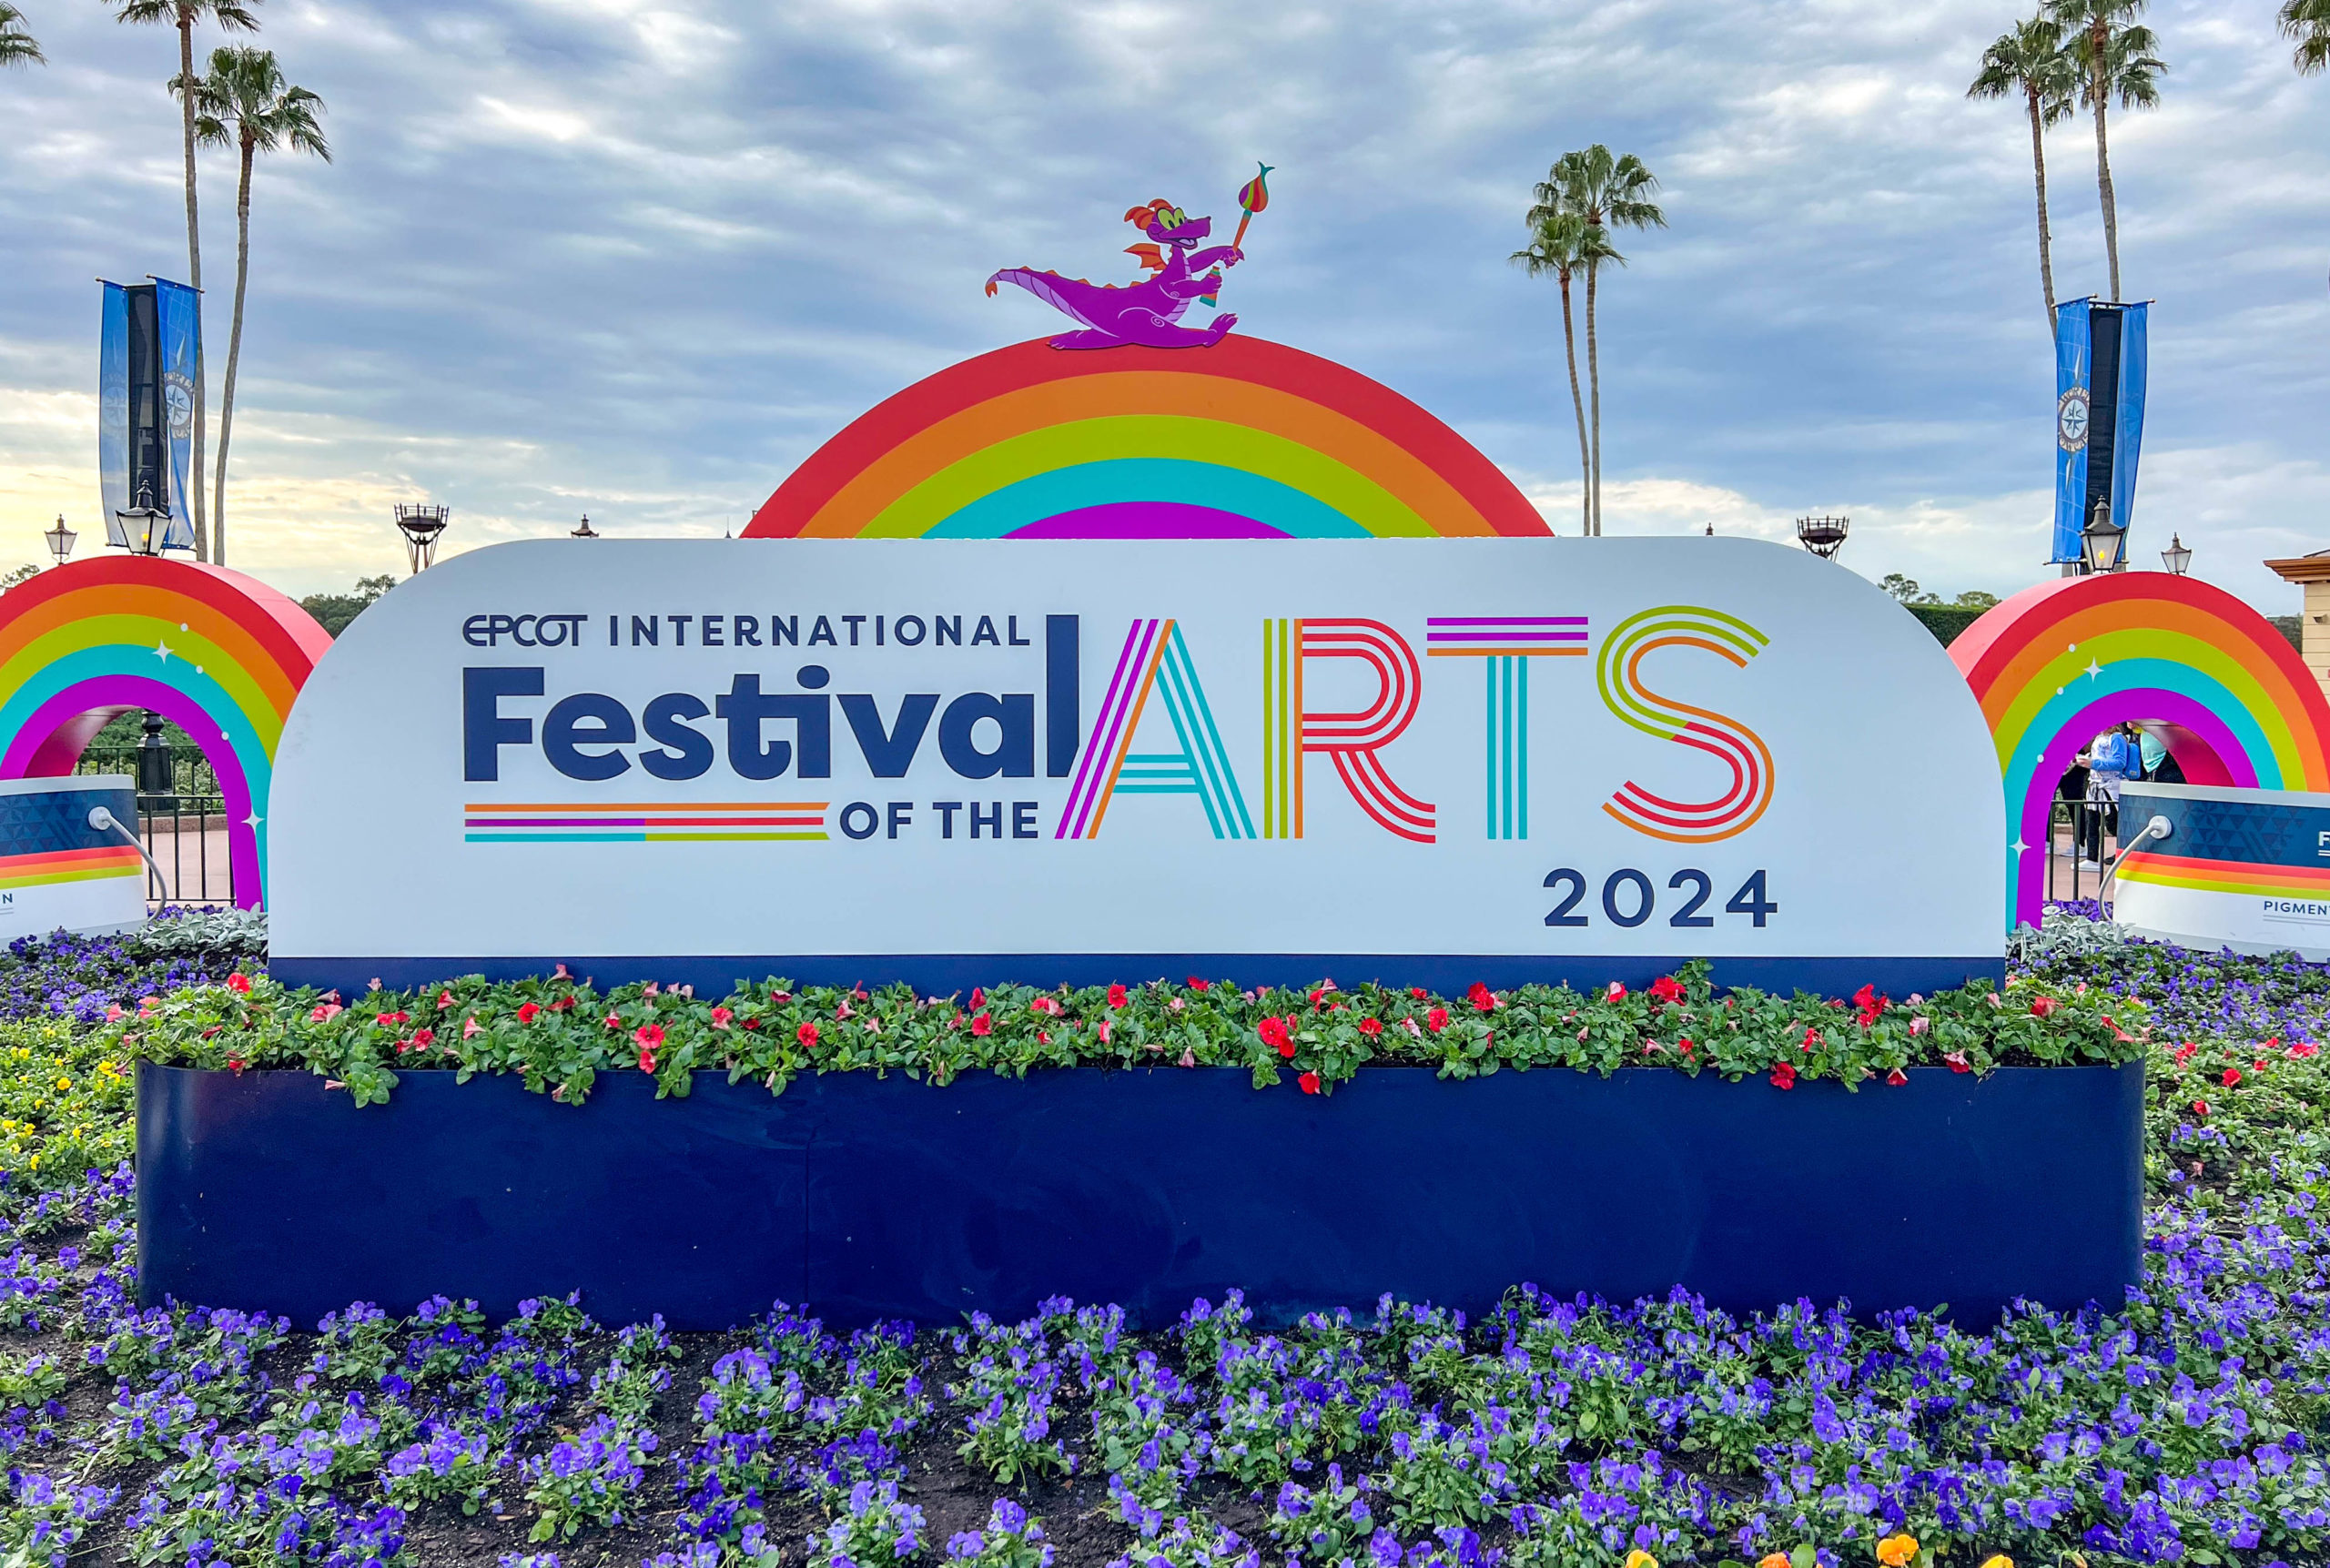 Festival of the Arts Menus (with Prices!) Now Up in EPCOT